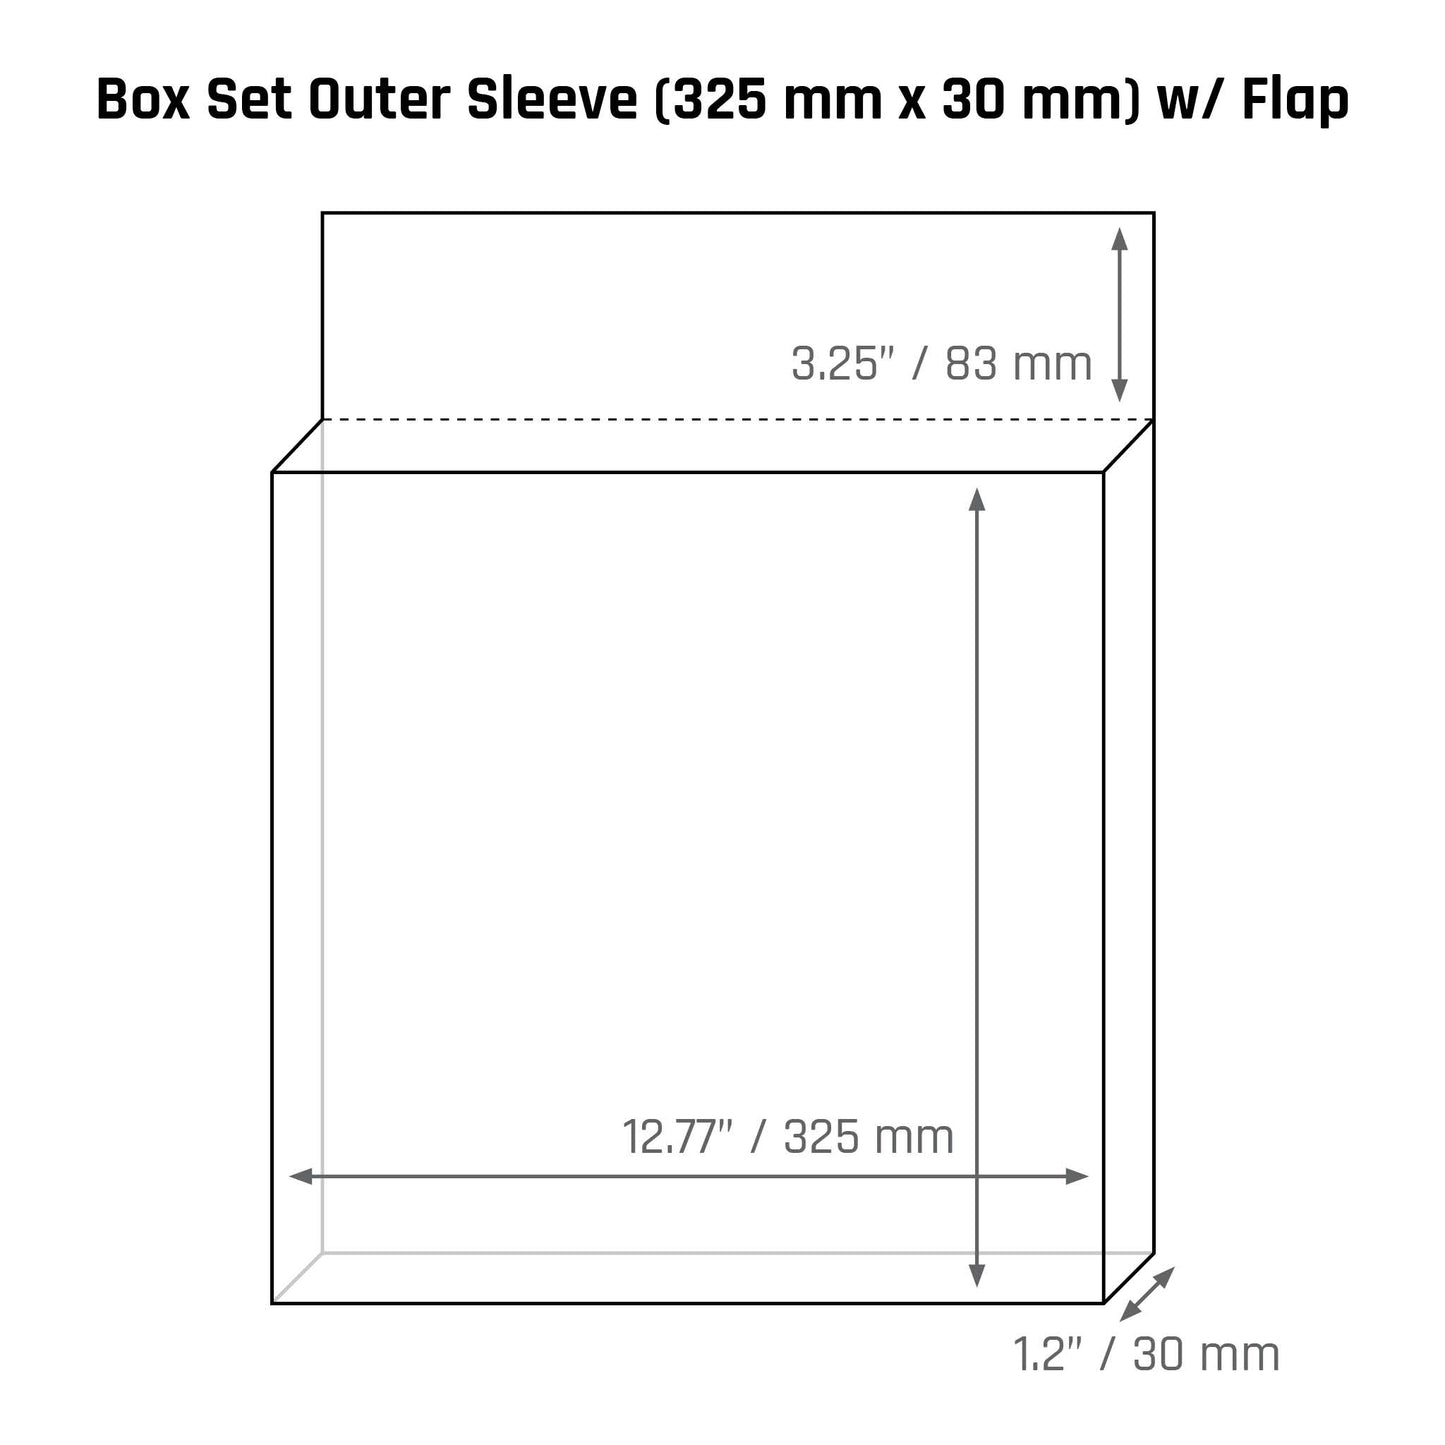 Box Set Outer Sleeve (325 mm x 30 mm) - 3mil